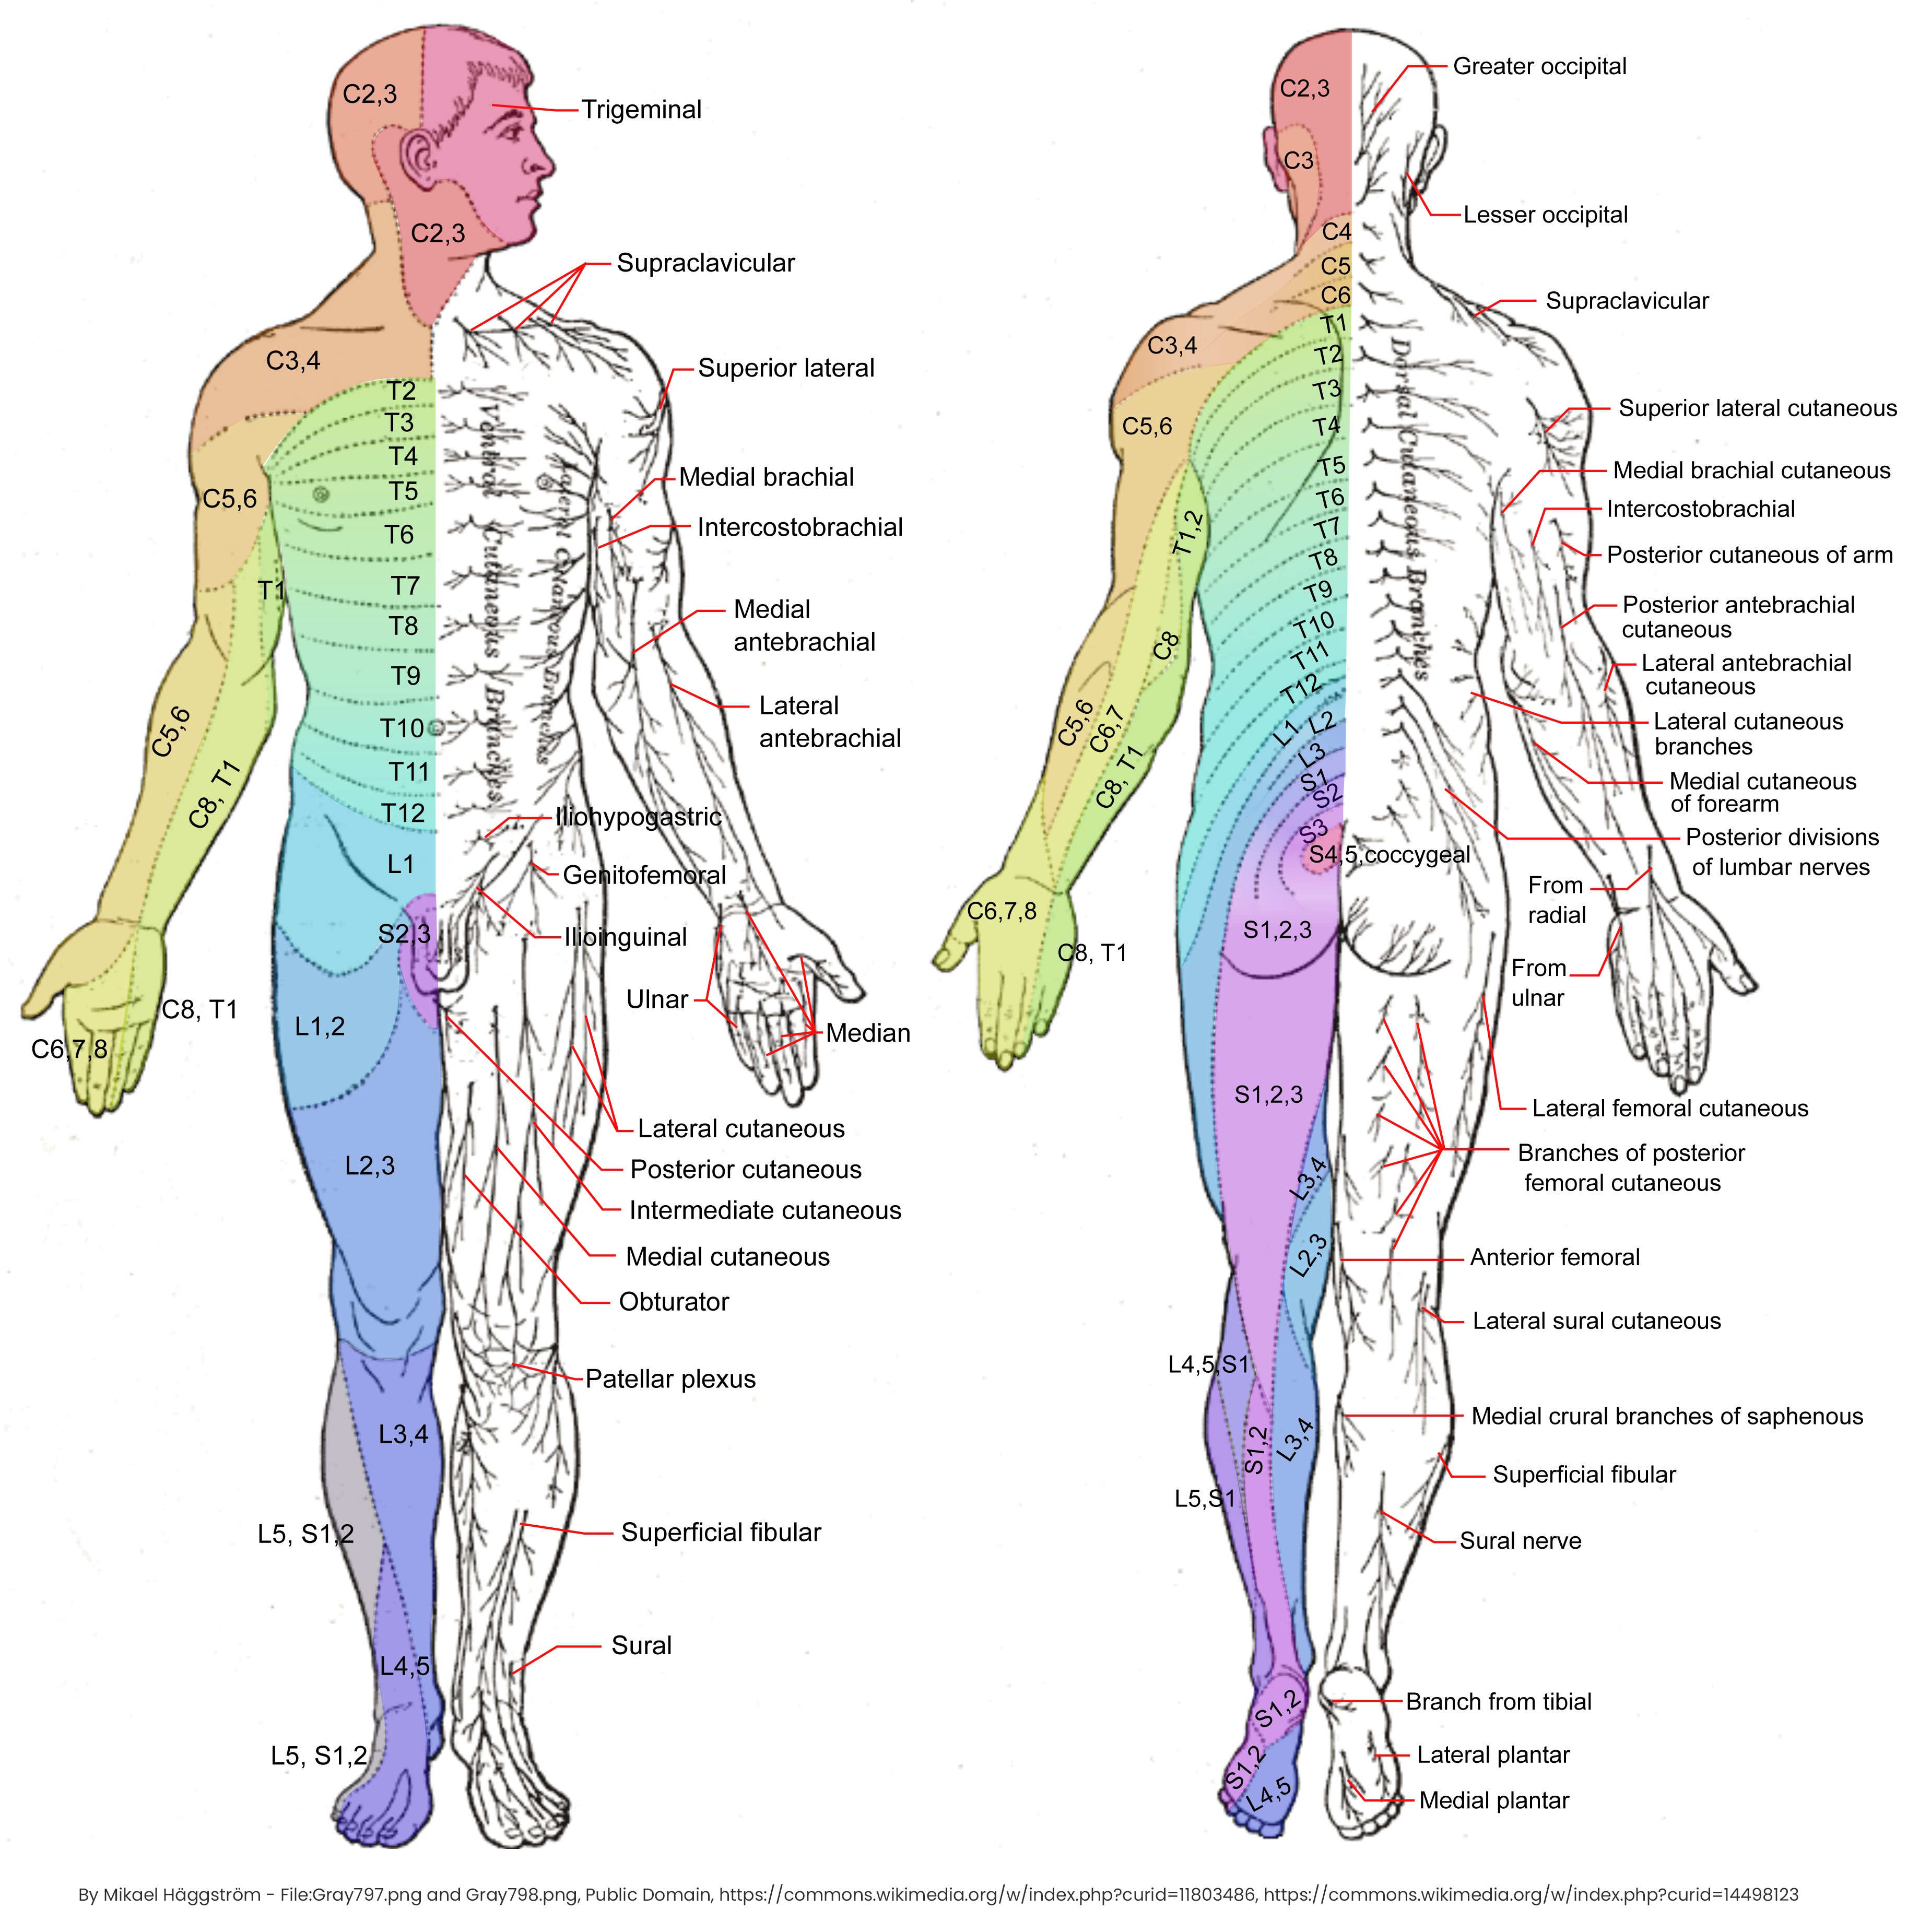 Drawing Dermatomes and Cutaneous Nerves in an Anterior and Posterior View - English labels